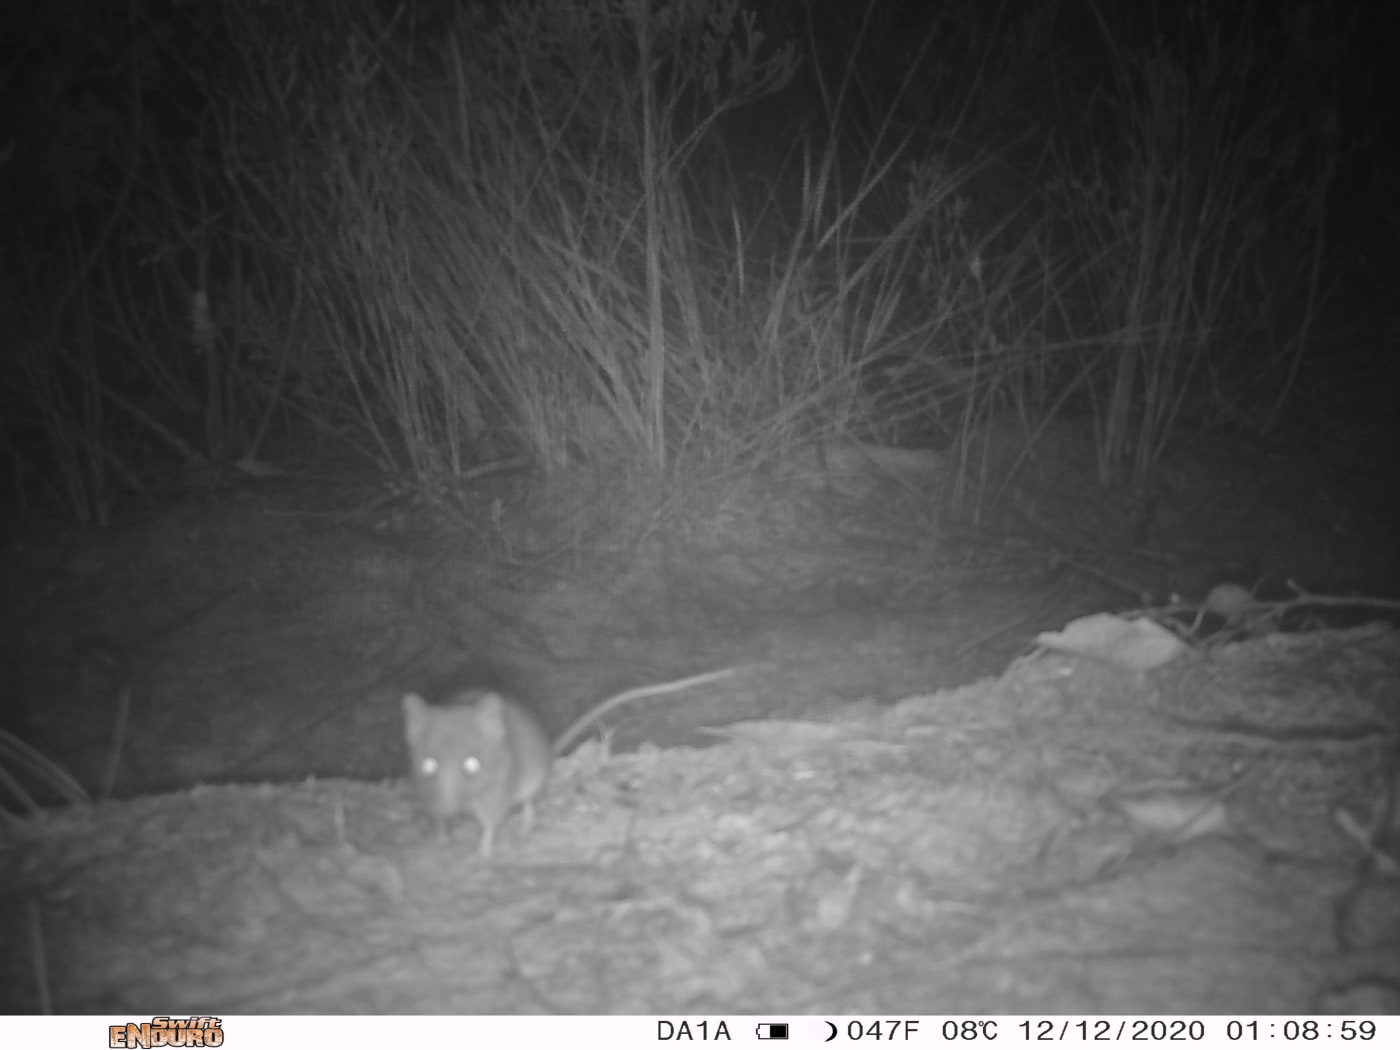 Kangaroo Island dunnart captured in a photo from a camera trap